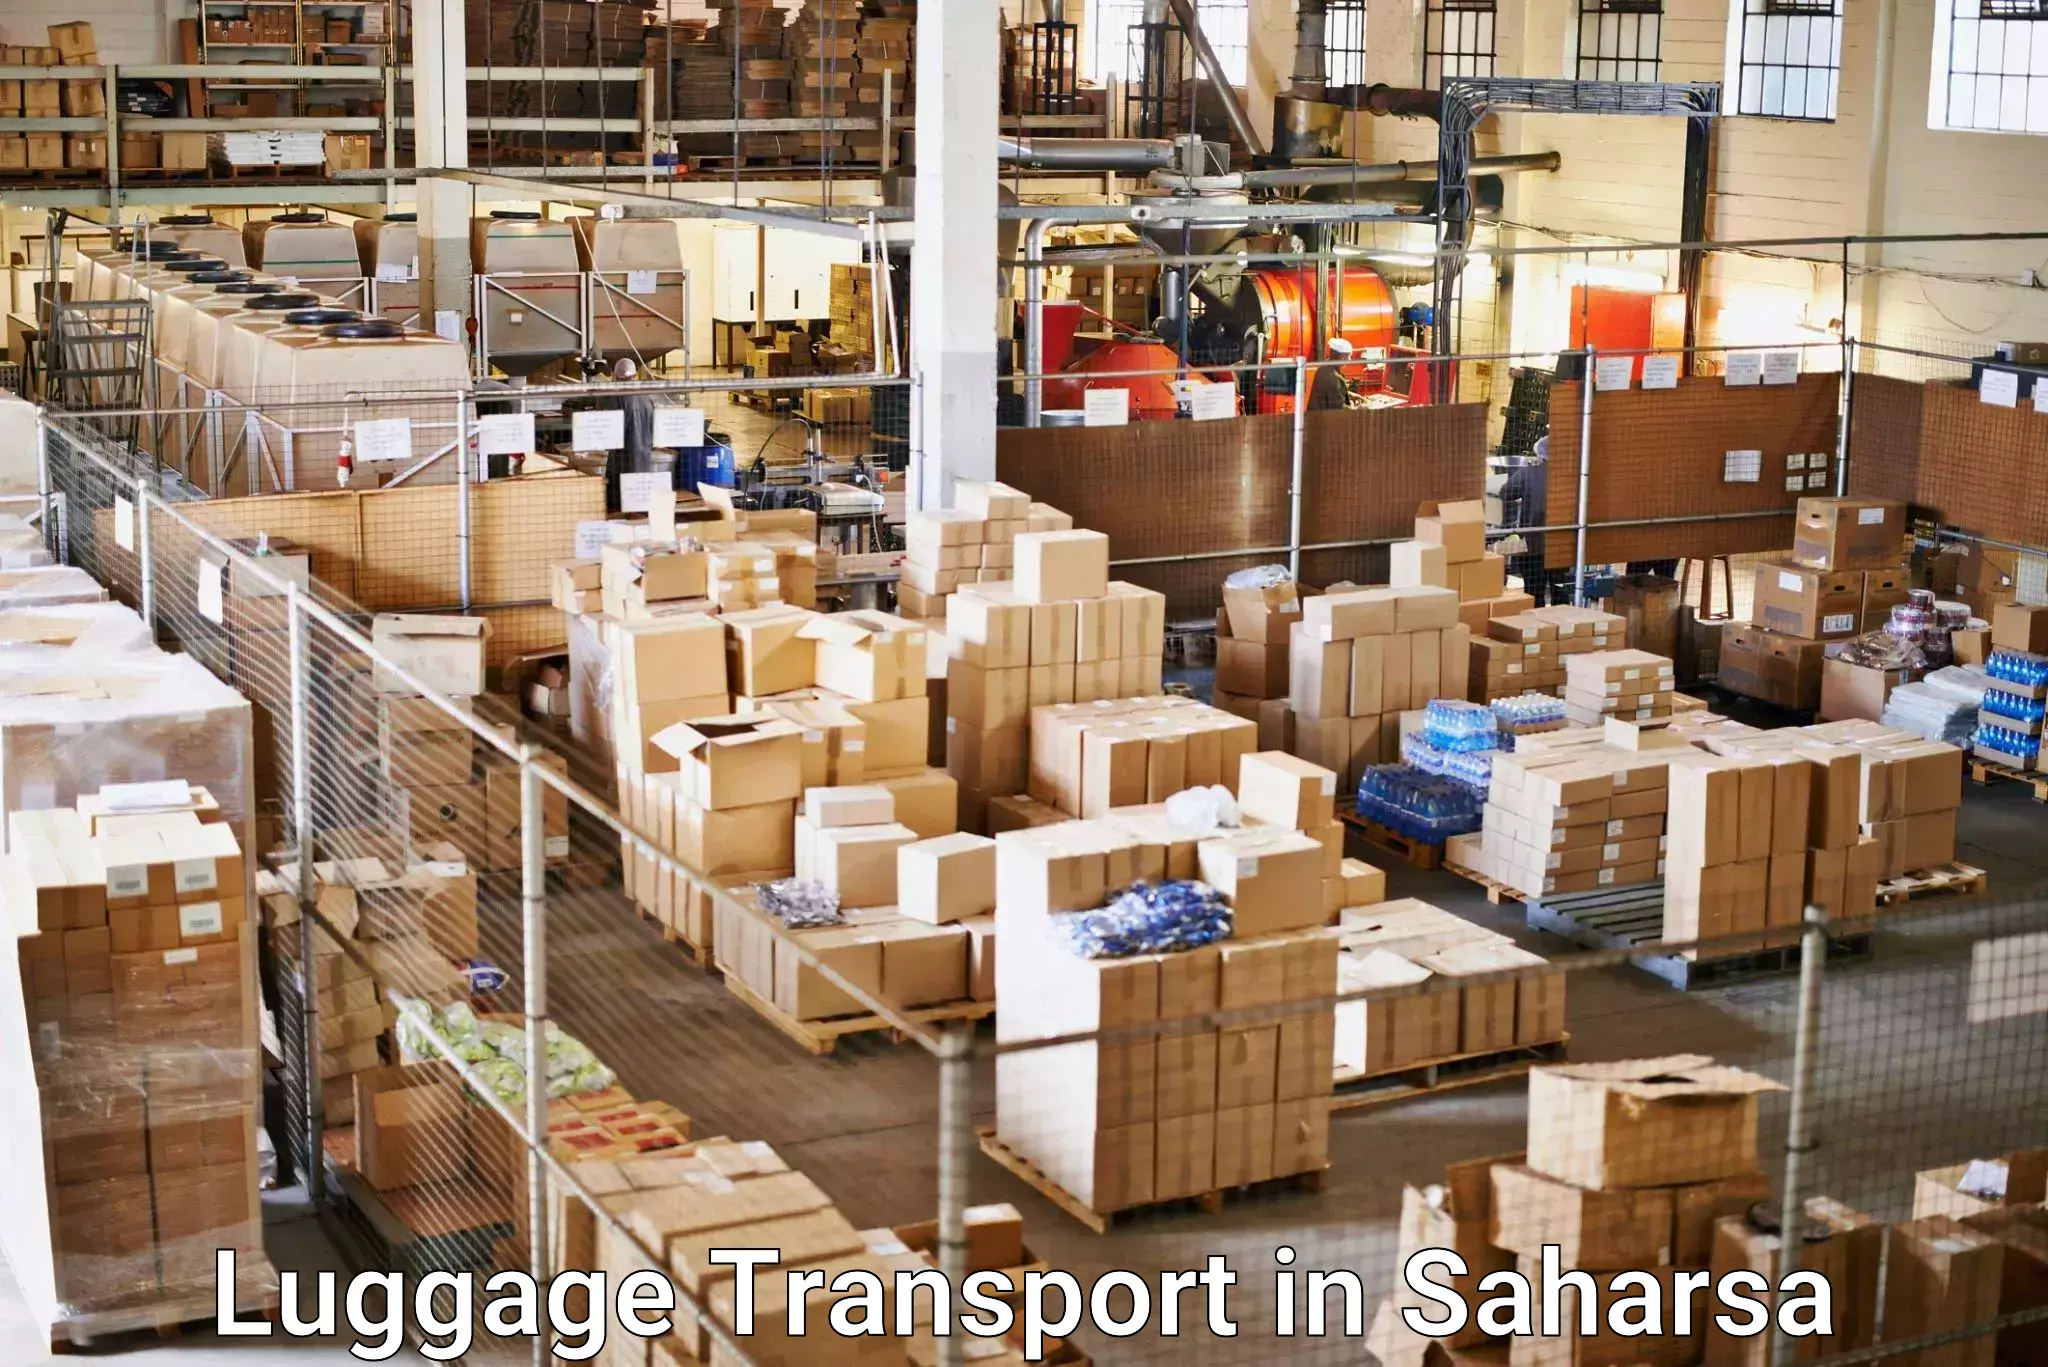 Hassle-free luggage shipping in Saharsa